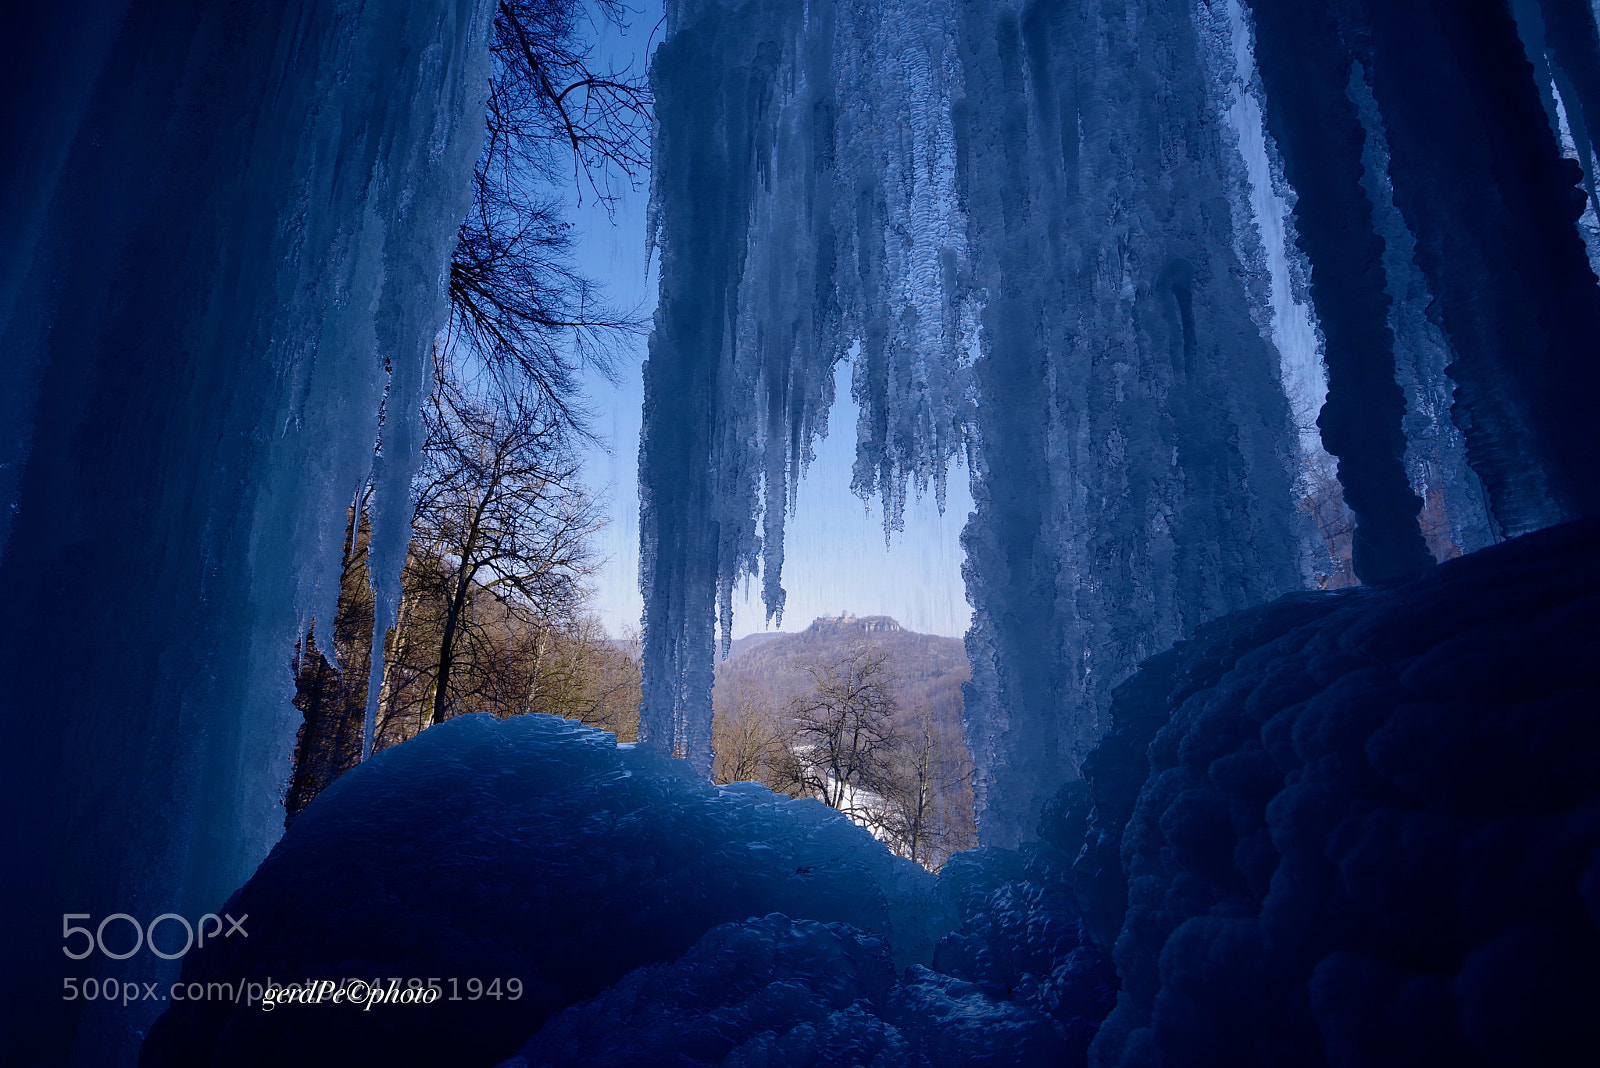 Pentax K-1 sample photo. Behind the ice curtain photography